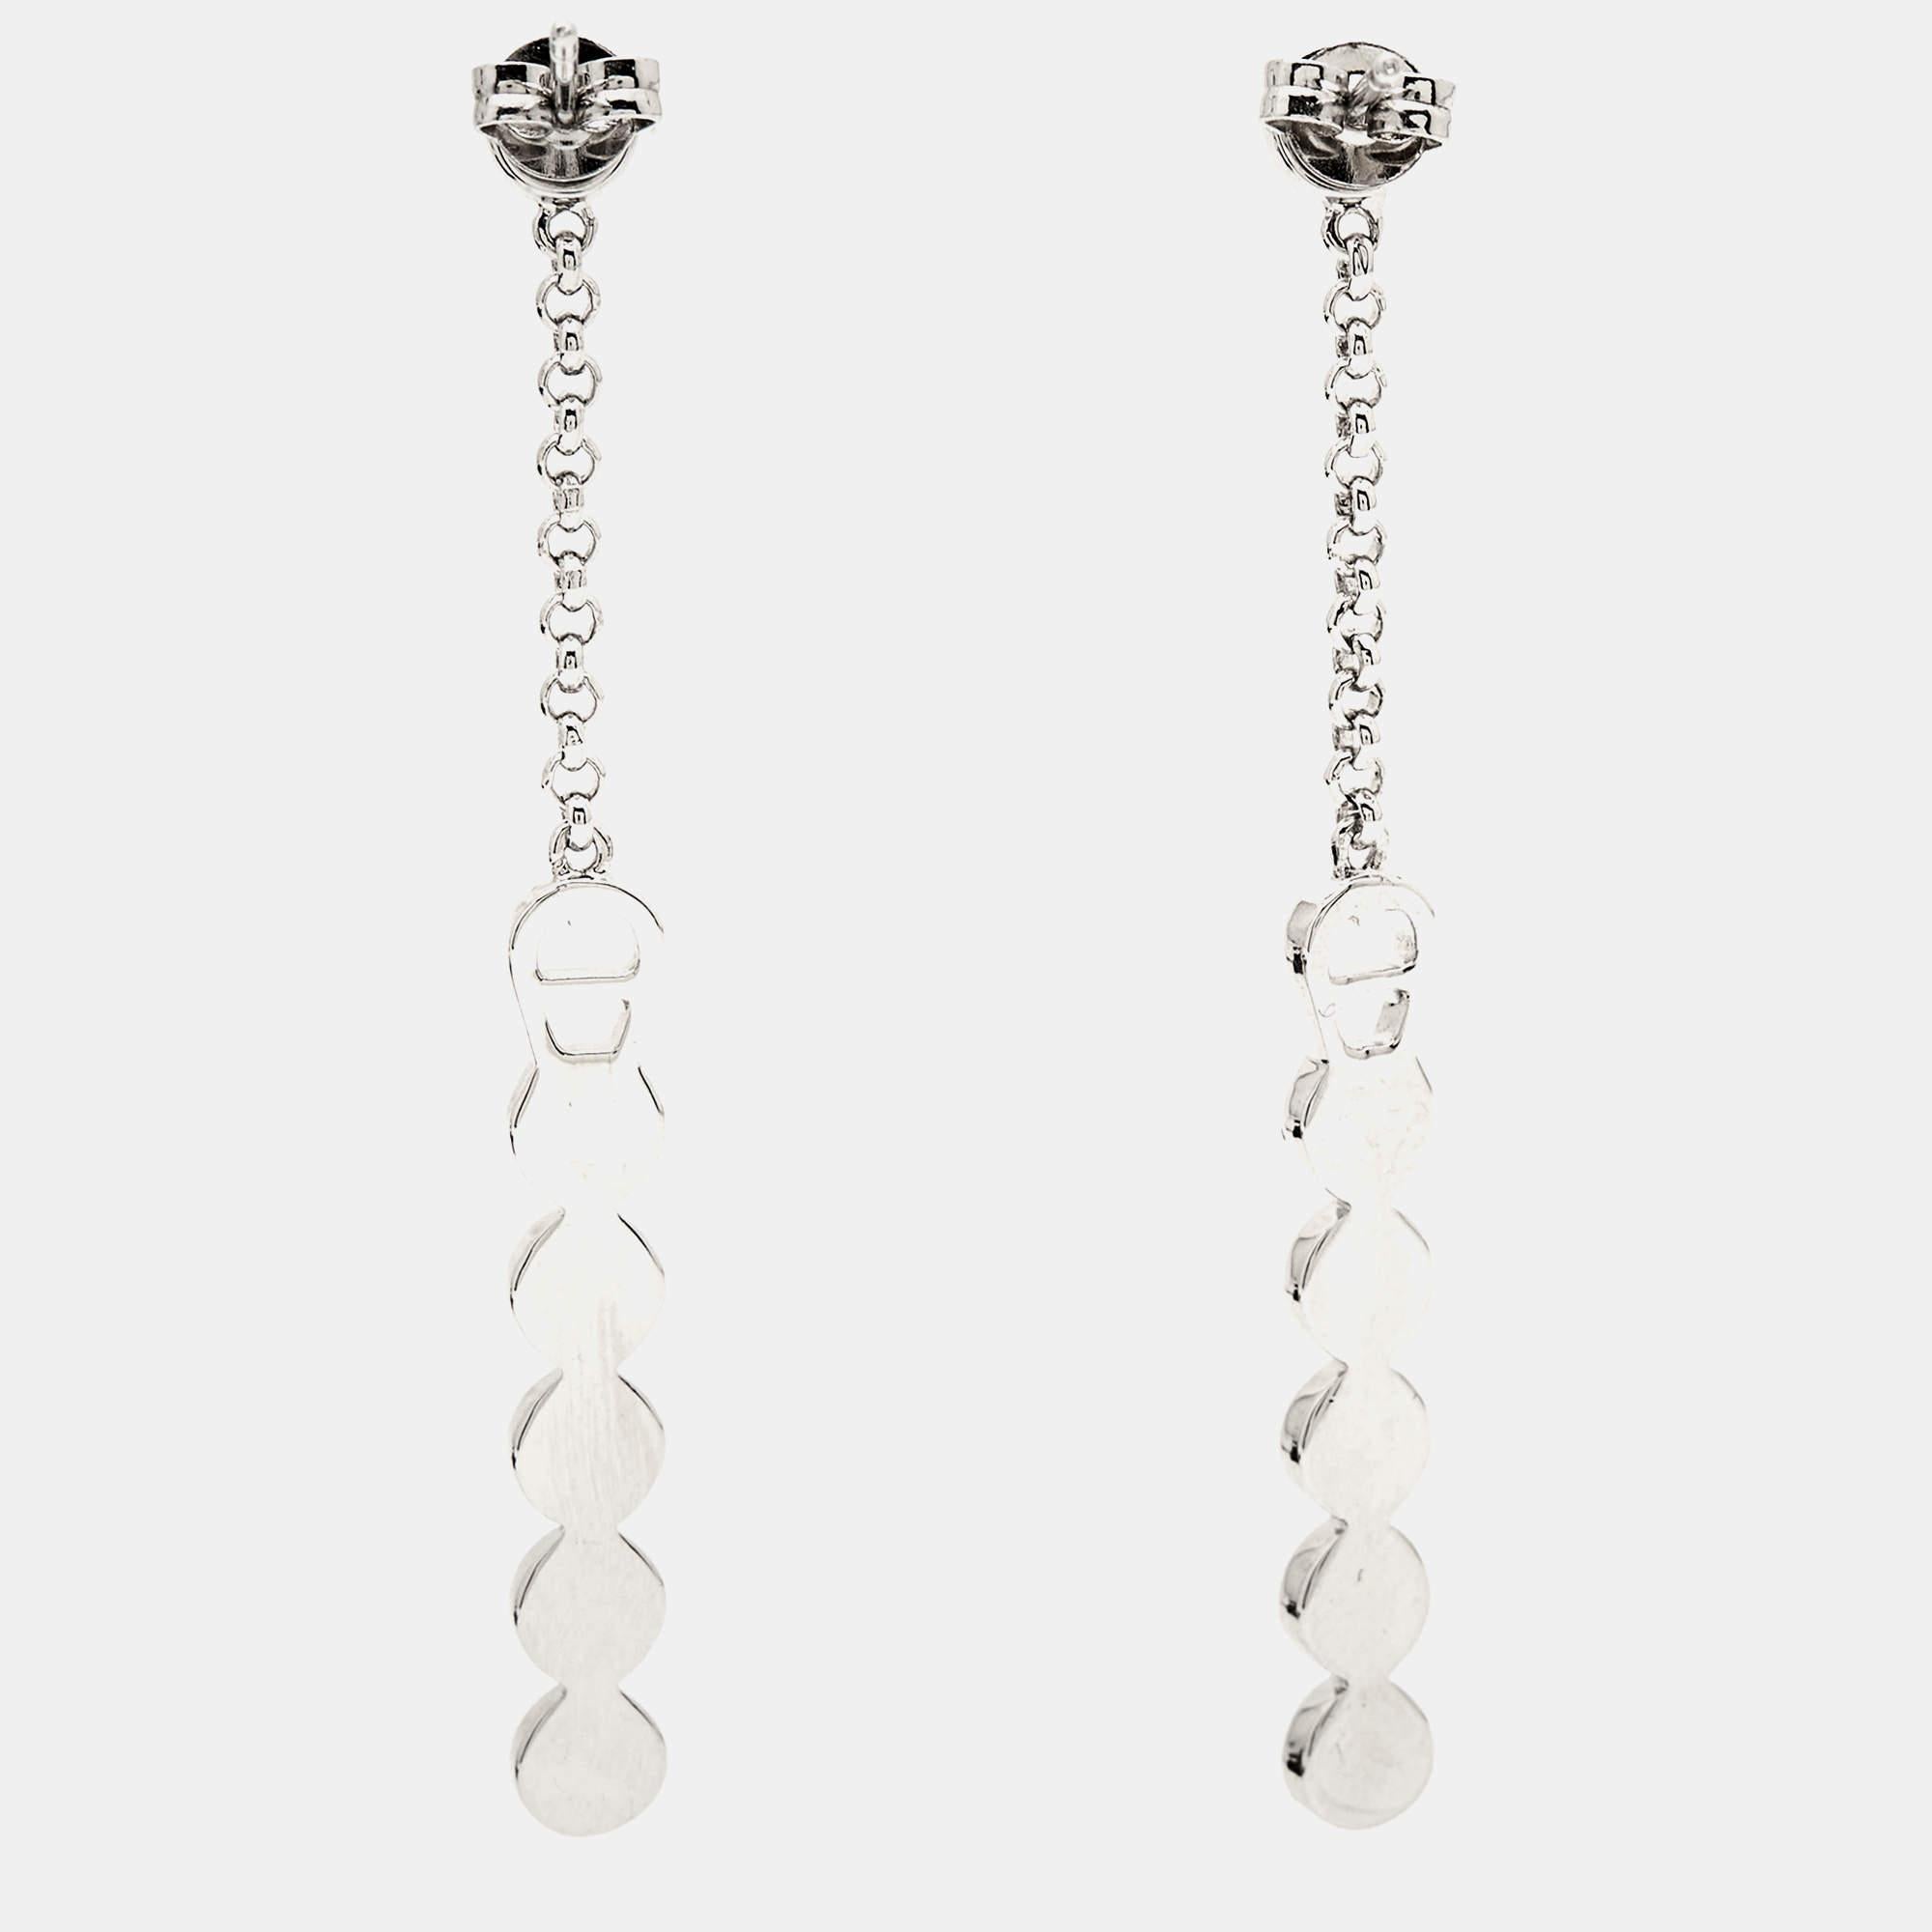 Easy to wear, beautiful, and stylish, these Aigner earrings are perfect to wear with your casual everyday edit as well as party looks. Constructed in silver-tone metal, this pair is beautified with crystals.

Includes: Original Dustbag